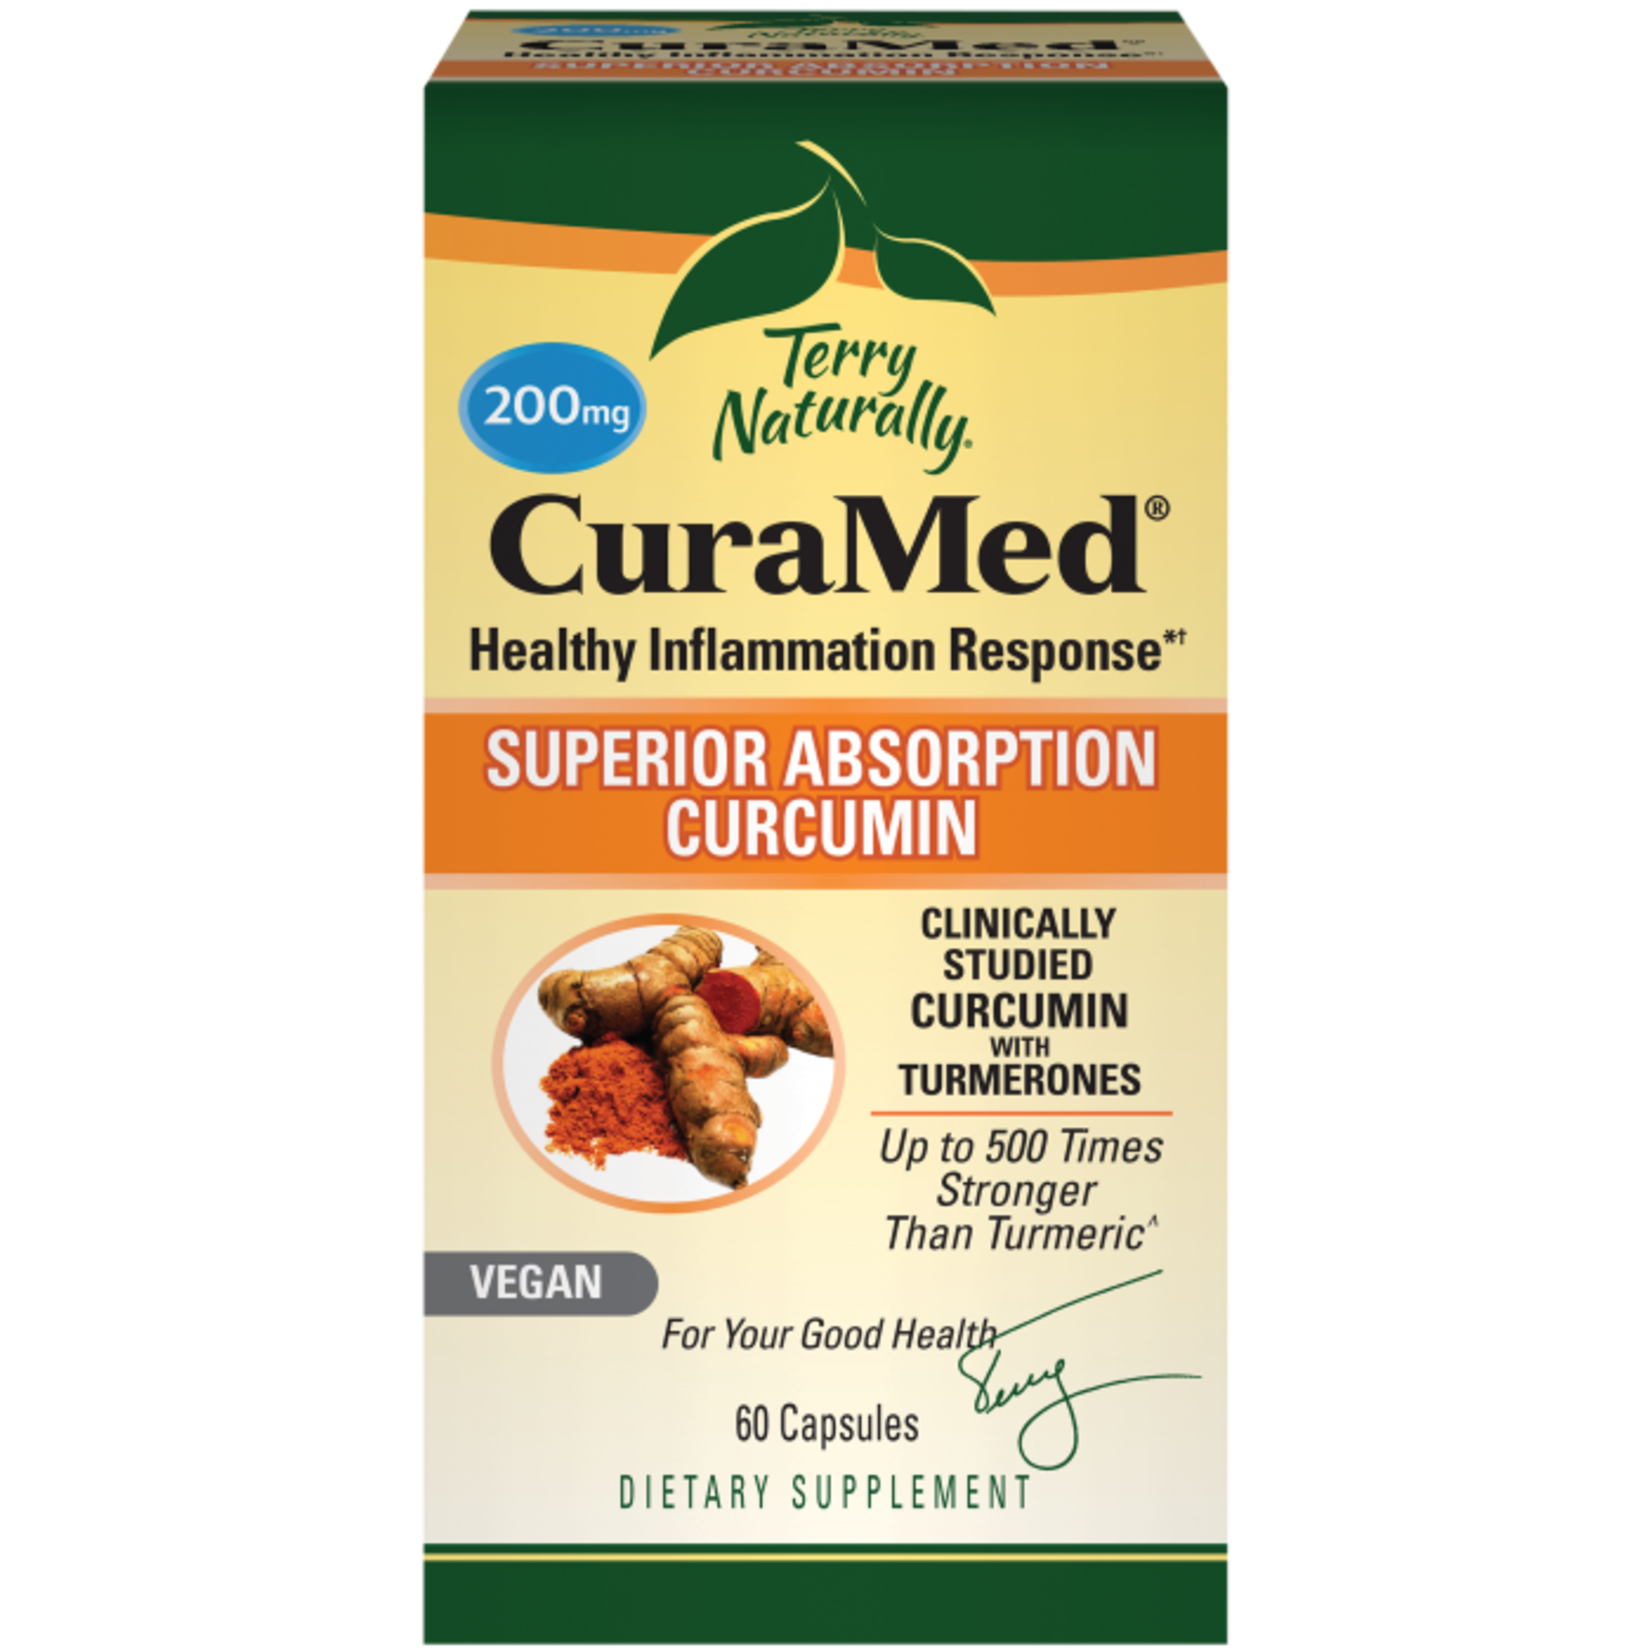 Terry Naturally Terry Naturally - Curamed 200 mg - 60 Capsules